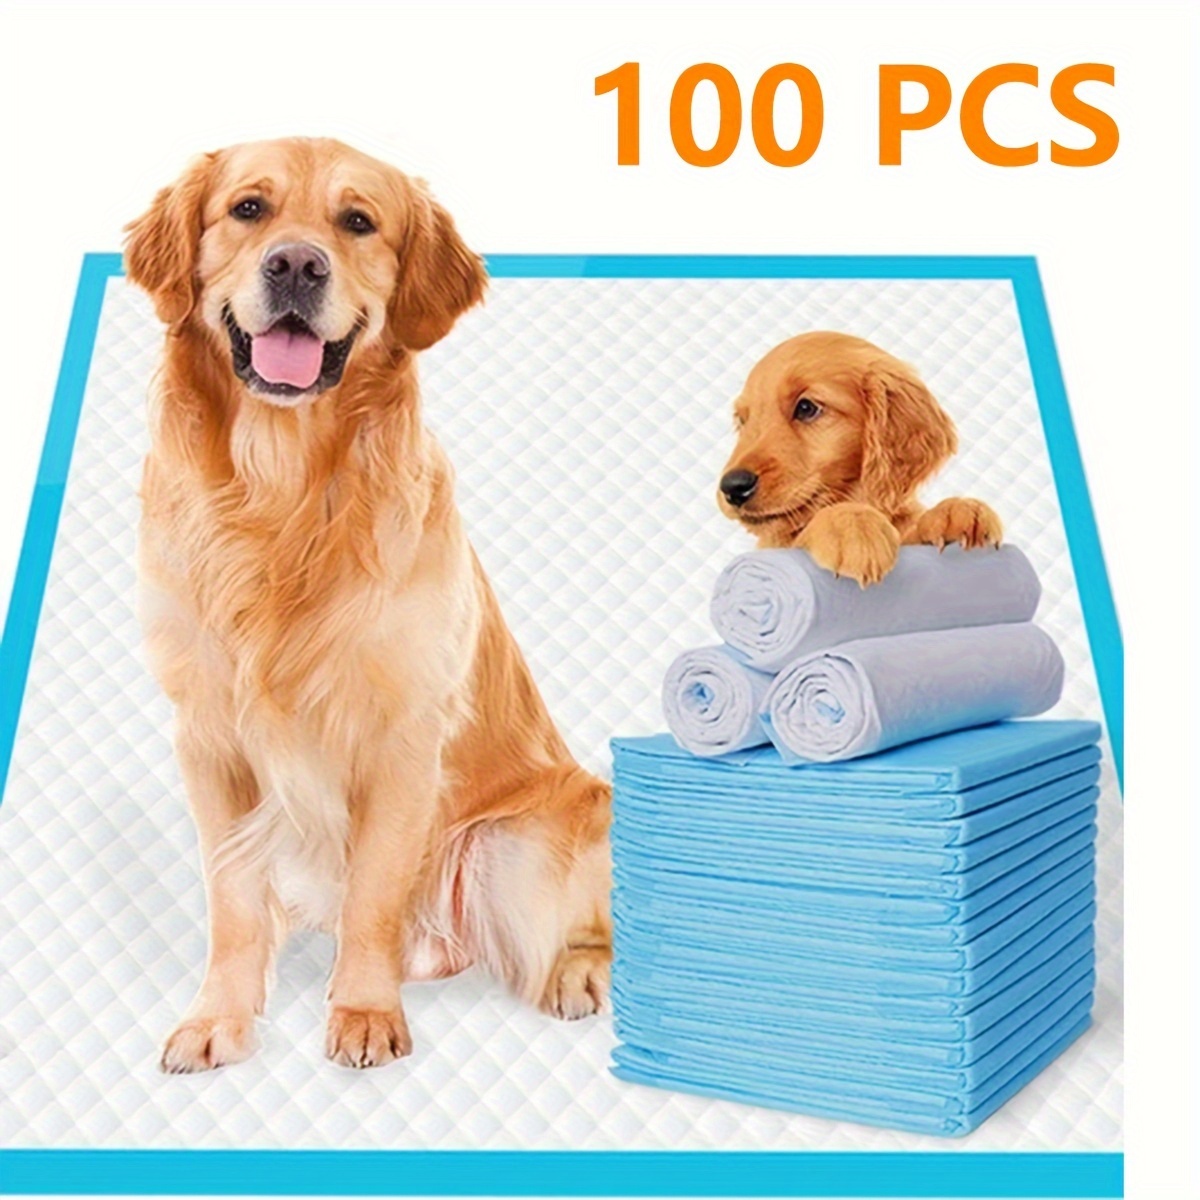 

100 Pcs Dog Pee Pad, Puppy Potty Training Pet Pads Dog Pads Extra Large Disposable Super Absorbent & Leak-free Pee Pads 22"x 22